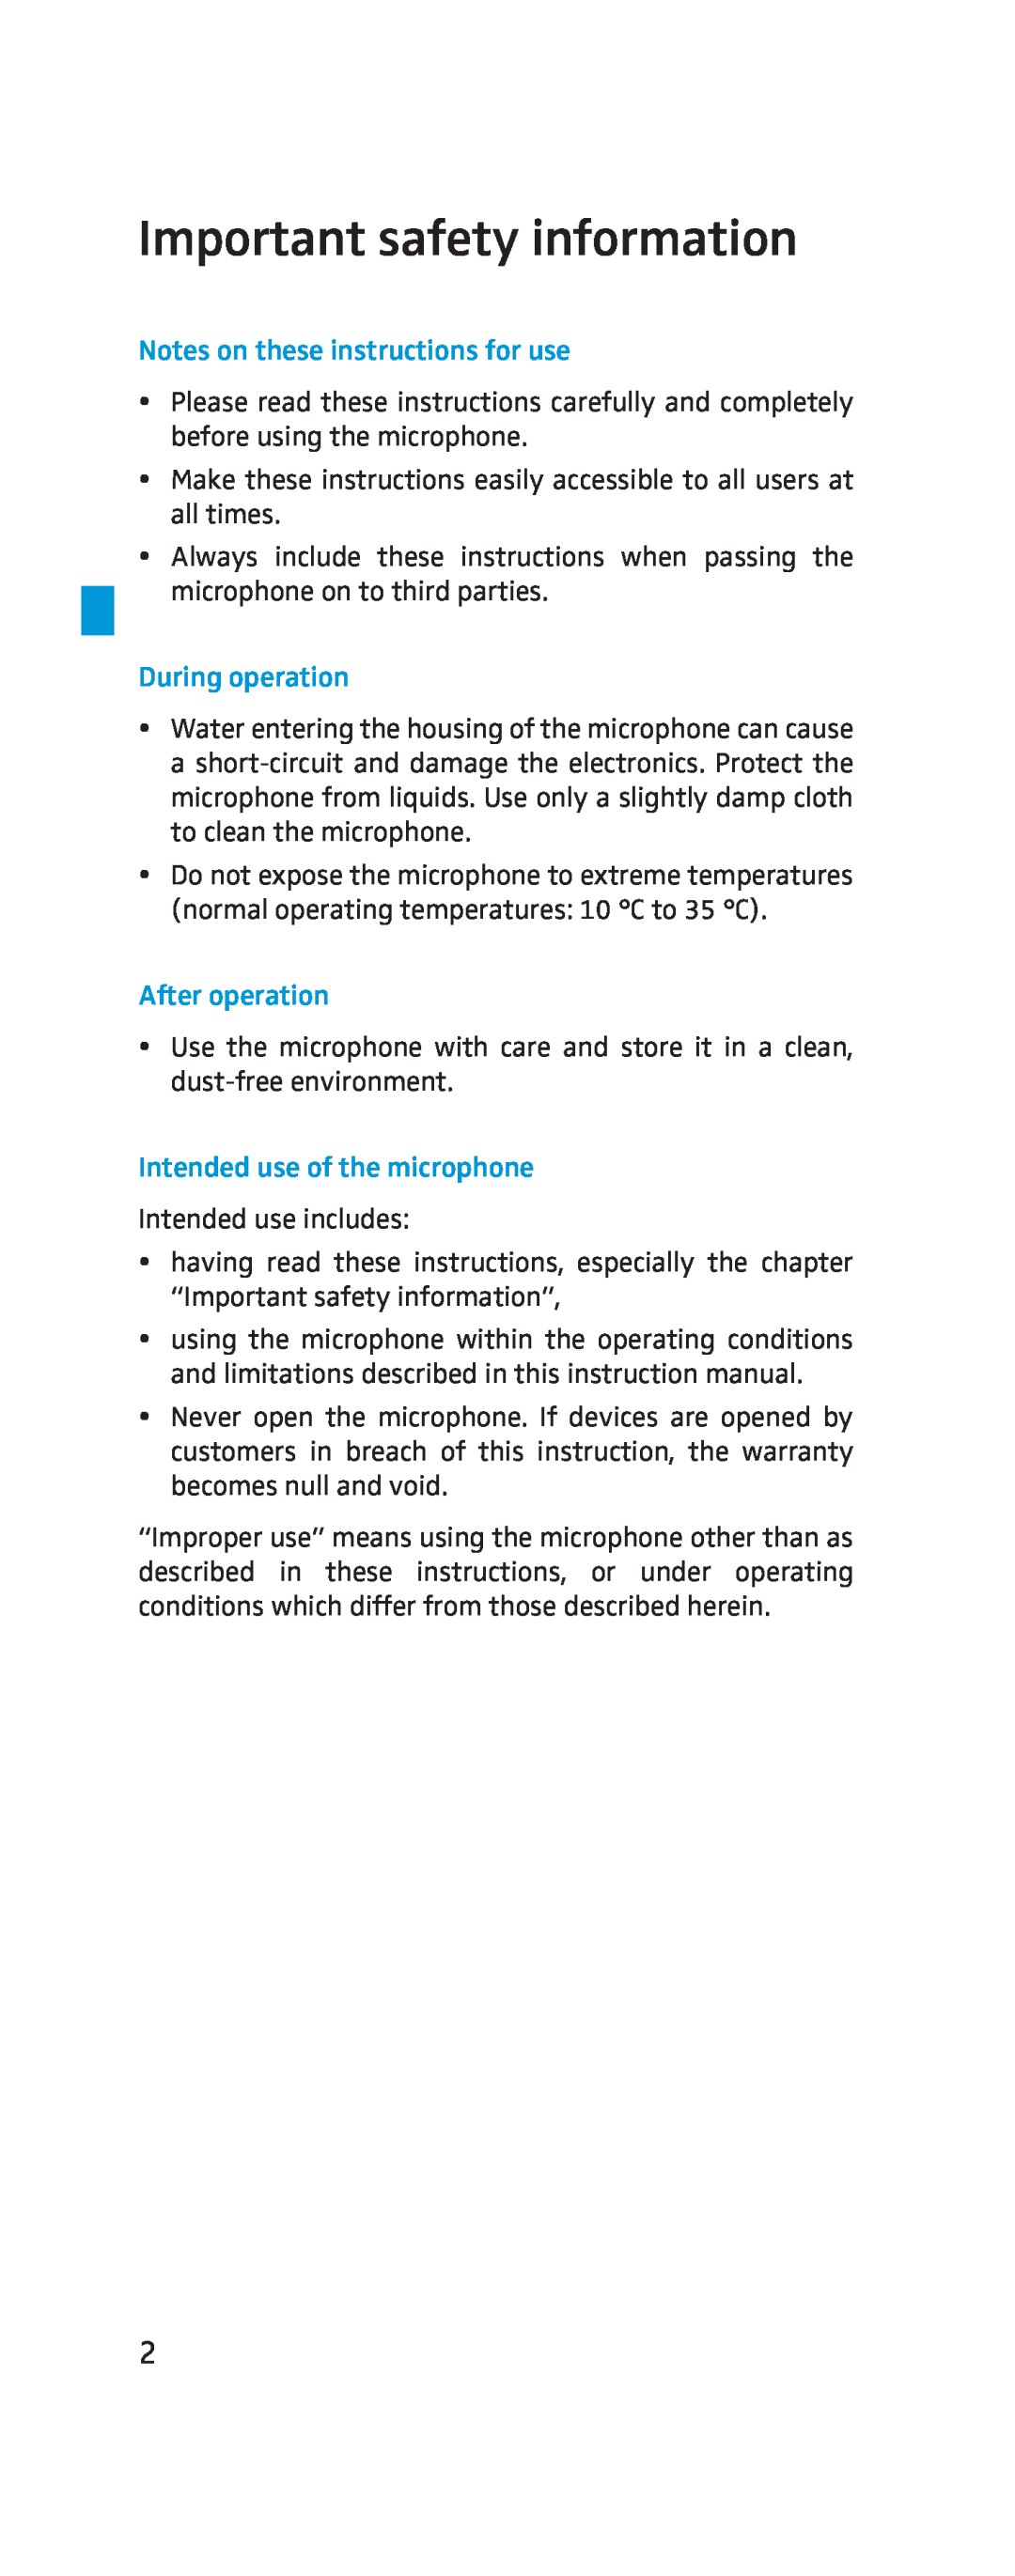 Sennheiser MKH-800 Important safety information, Notes on these instructions for use, During operation, After operation 